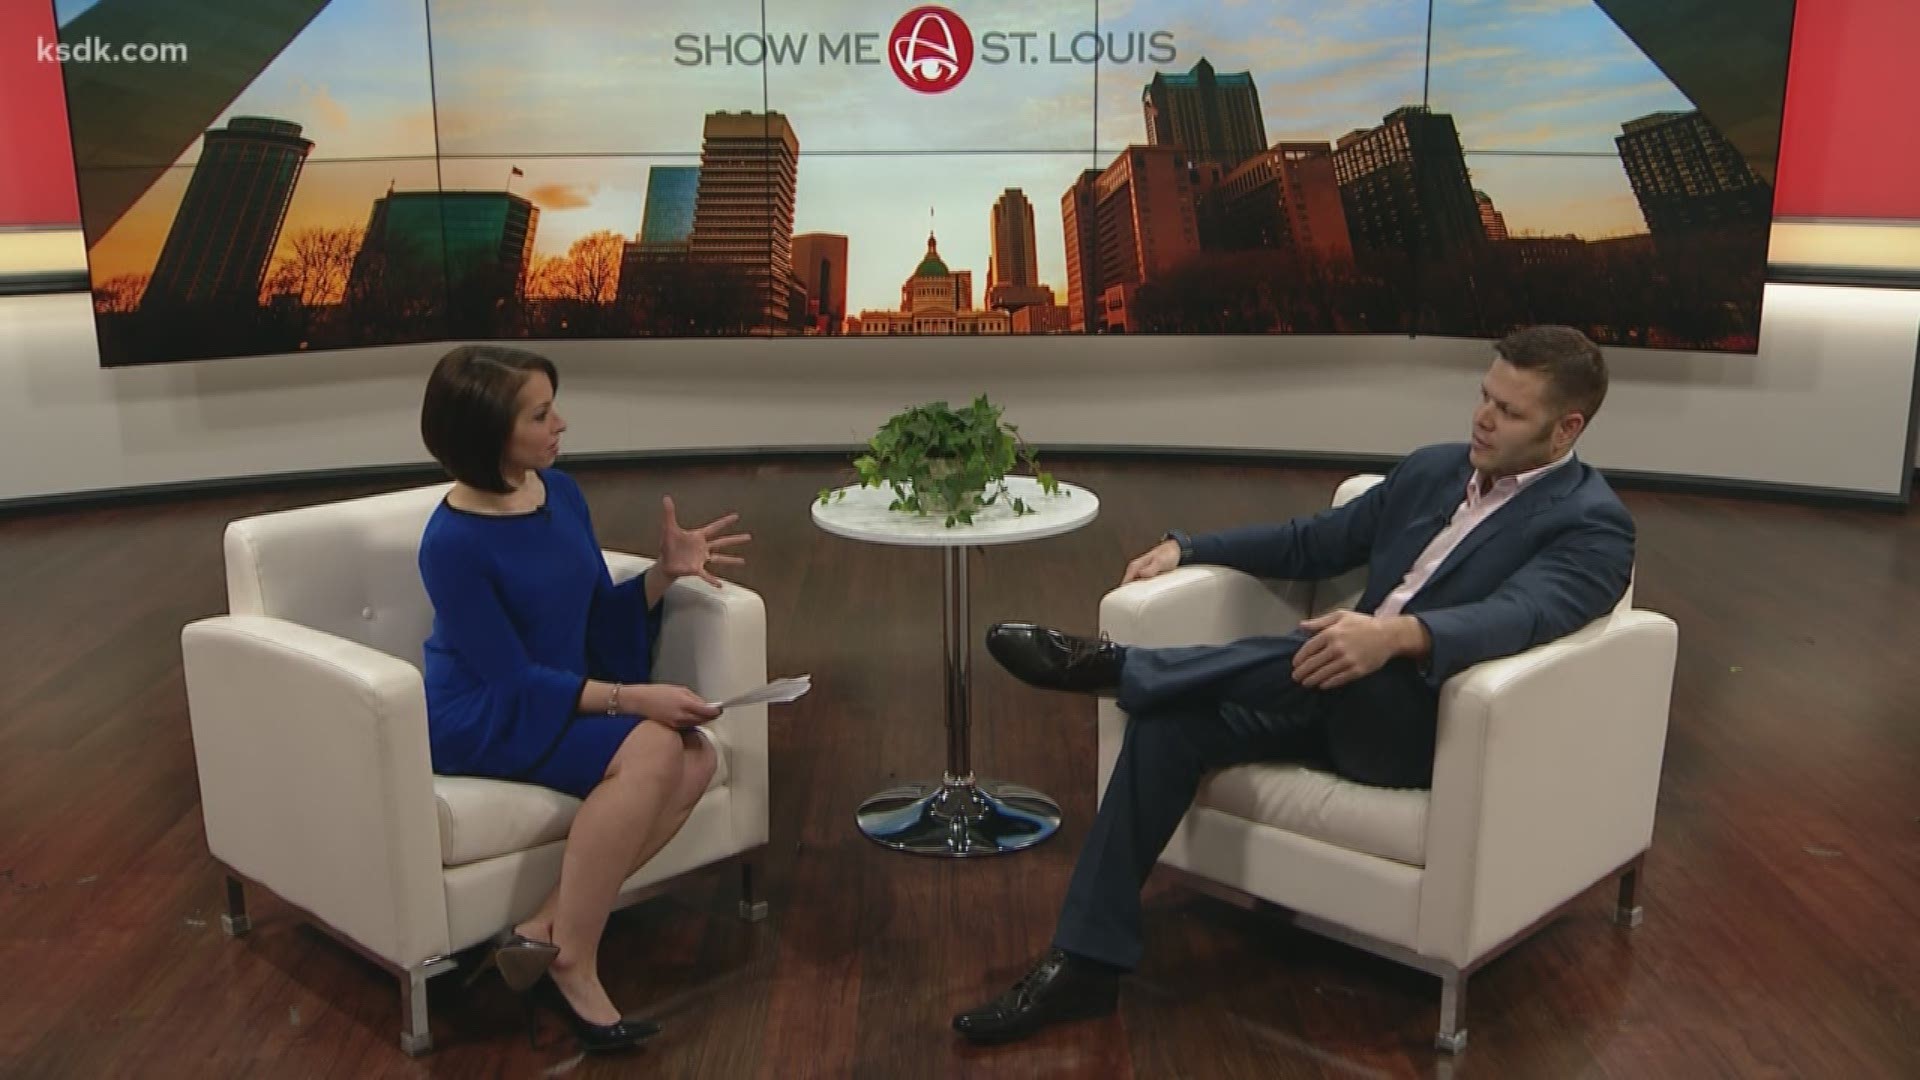 National Consumer Direct Manager Todd Feager joined us on Show Me St. Louis to highlight this business.